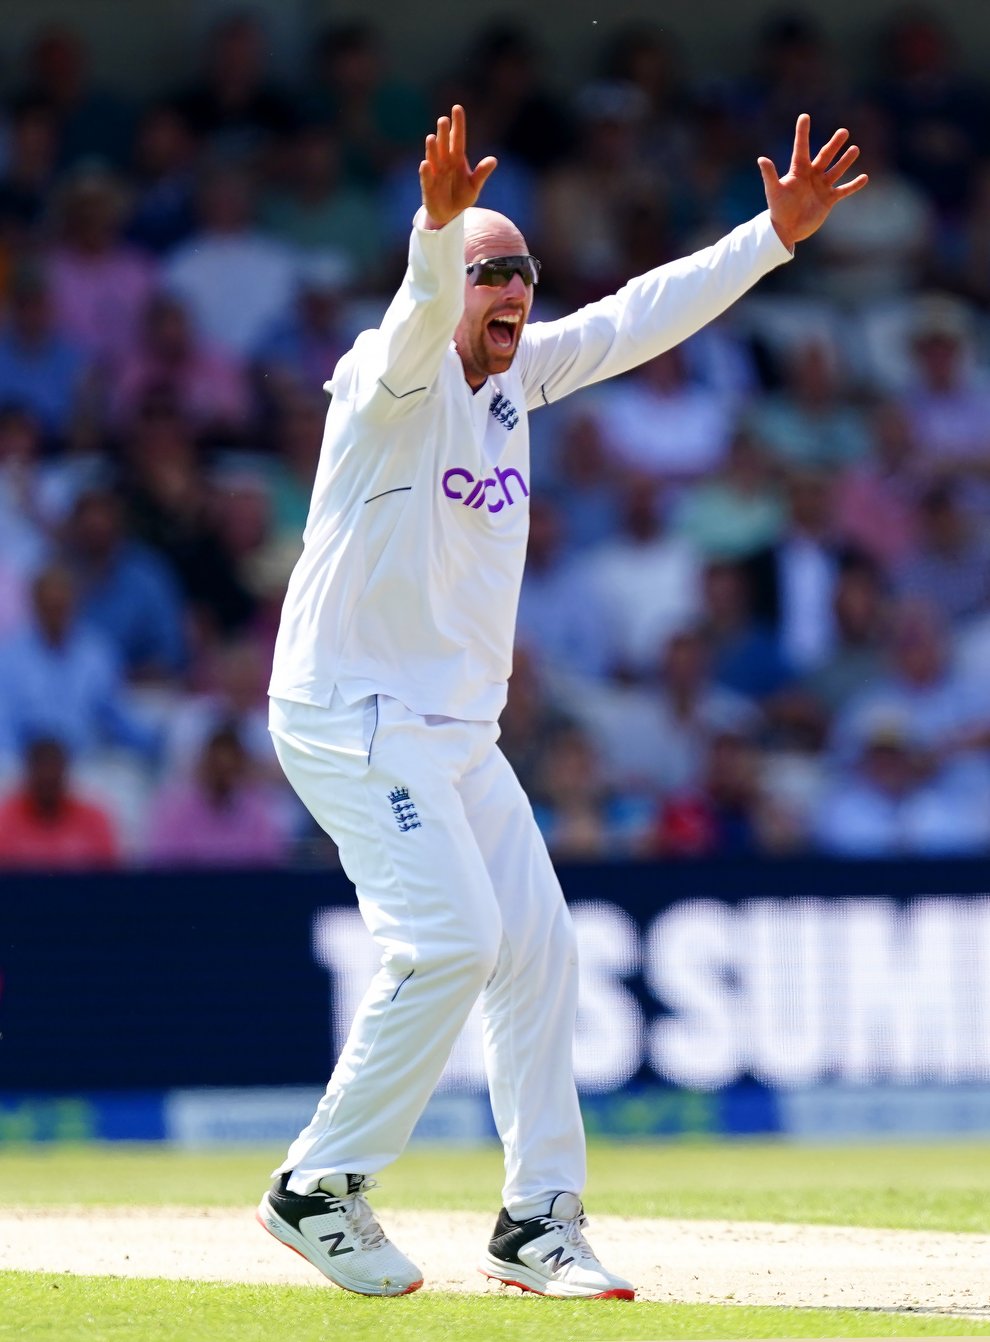 Jack Leach took two wickets on the opening day of the Headingley Test (Mike Egerton/PA)